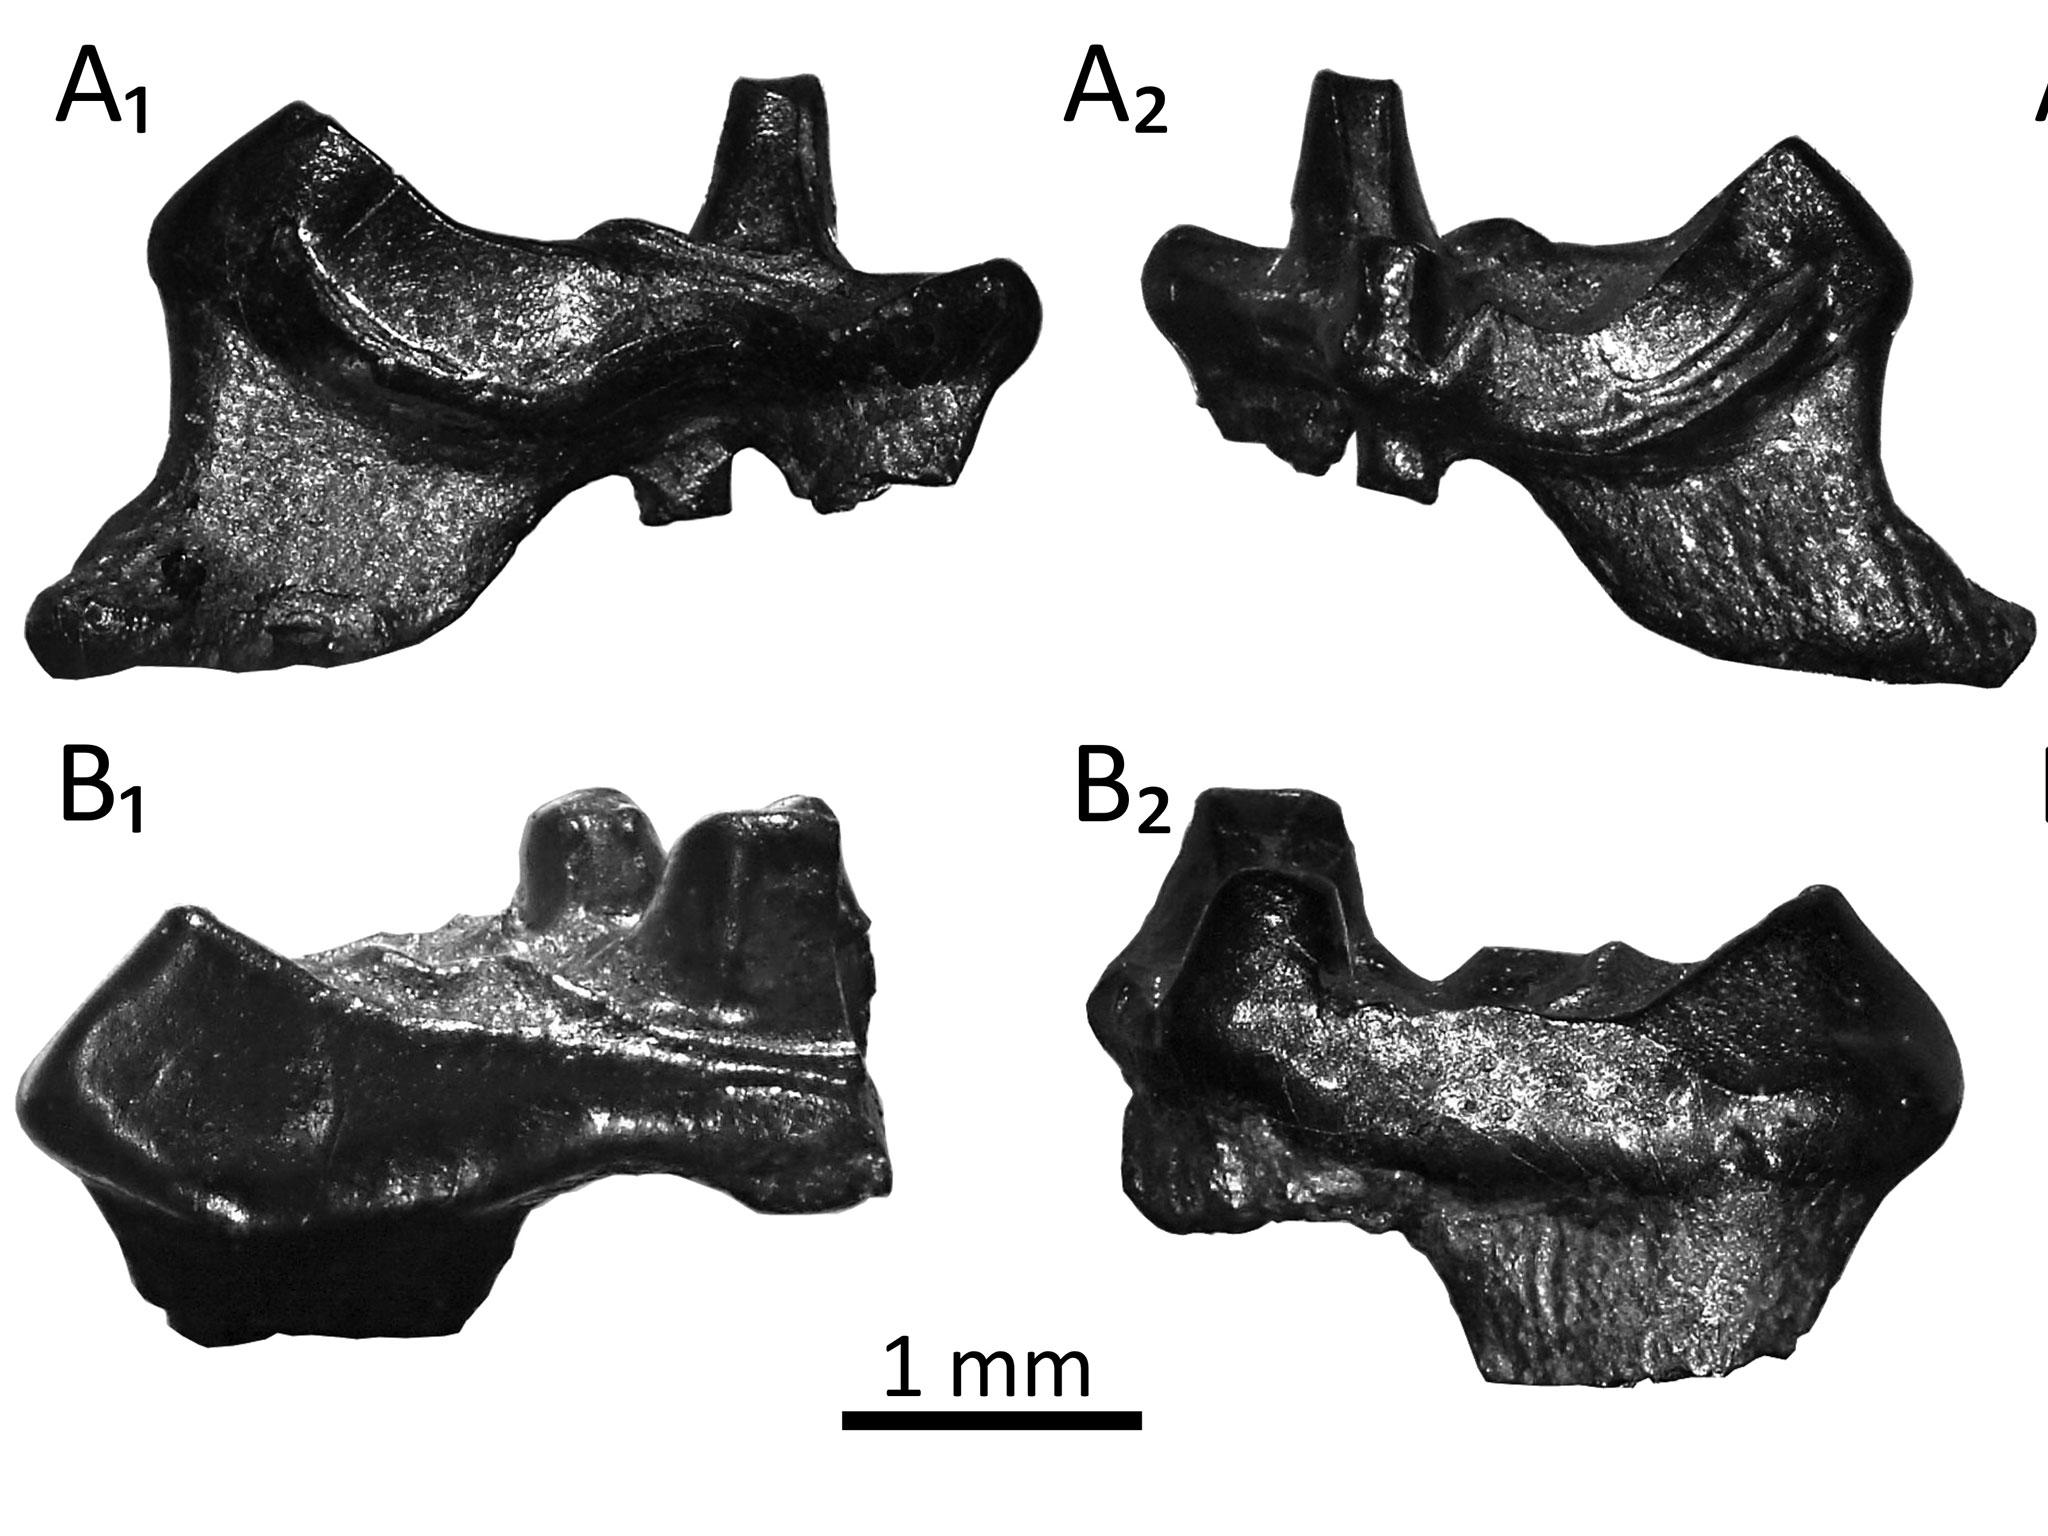 The teeth samples can be linked to mammals living today